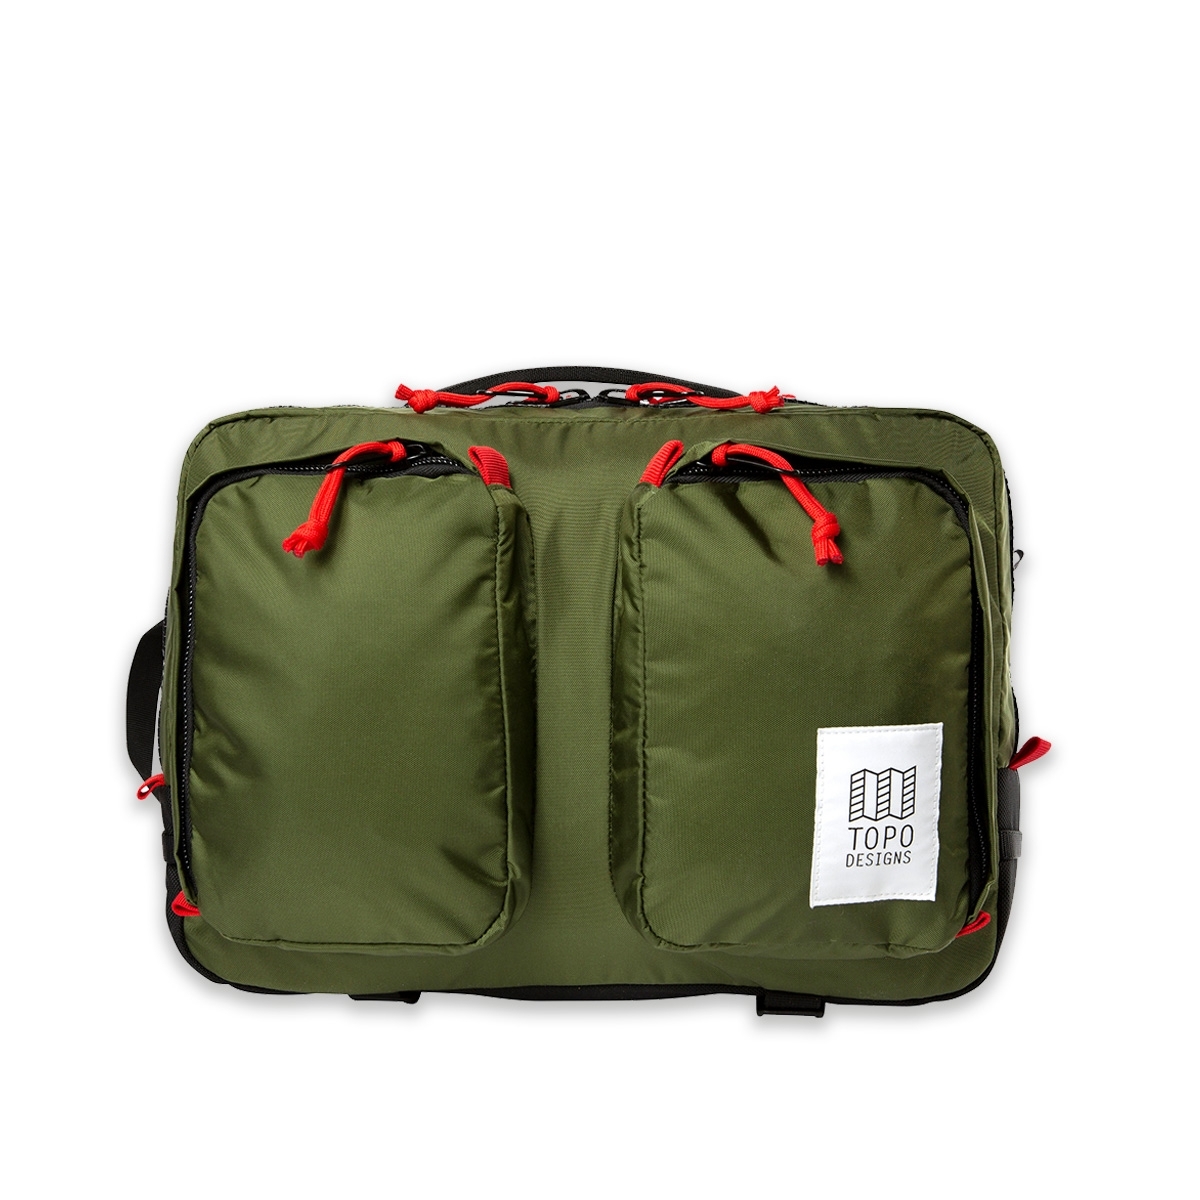 Topo Designs Global Briefcase Olive, the perfect bag for everyday carry